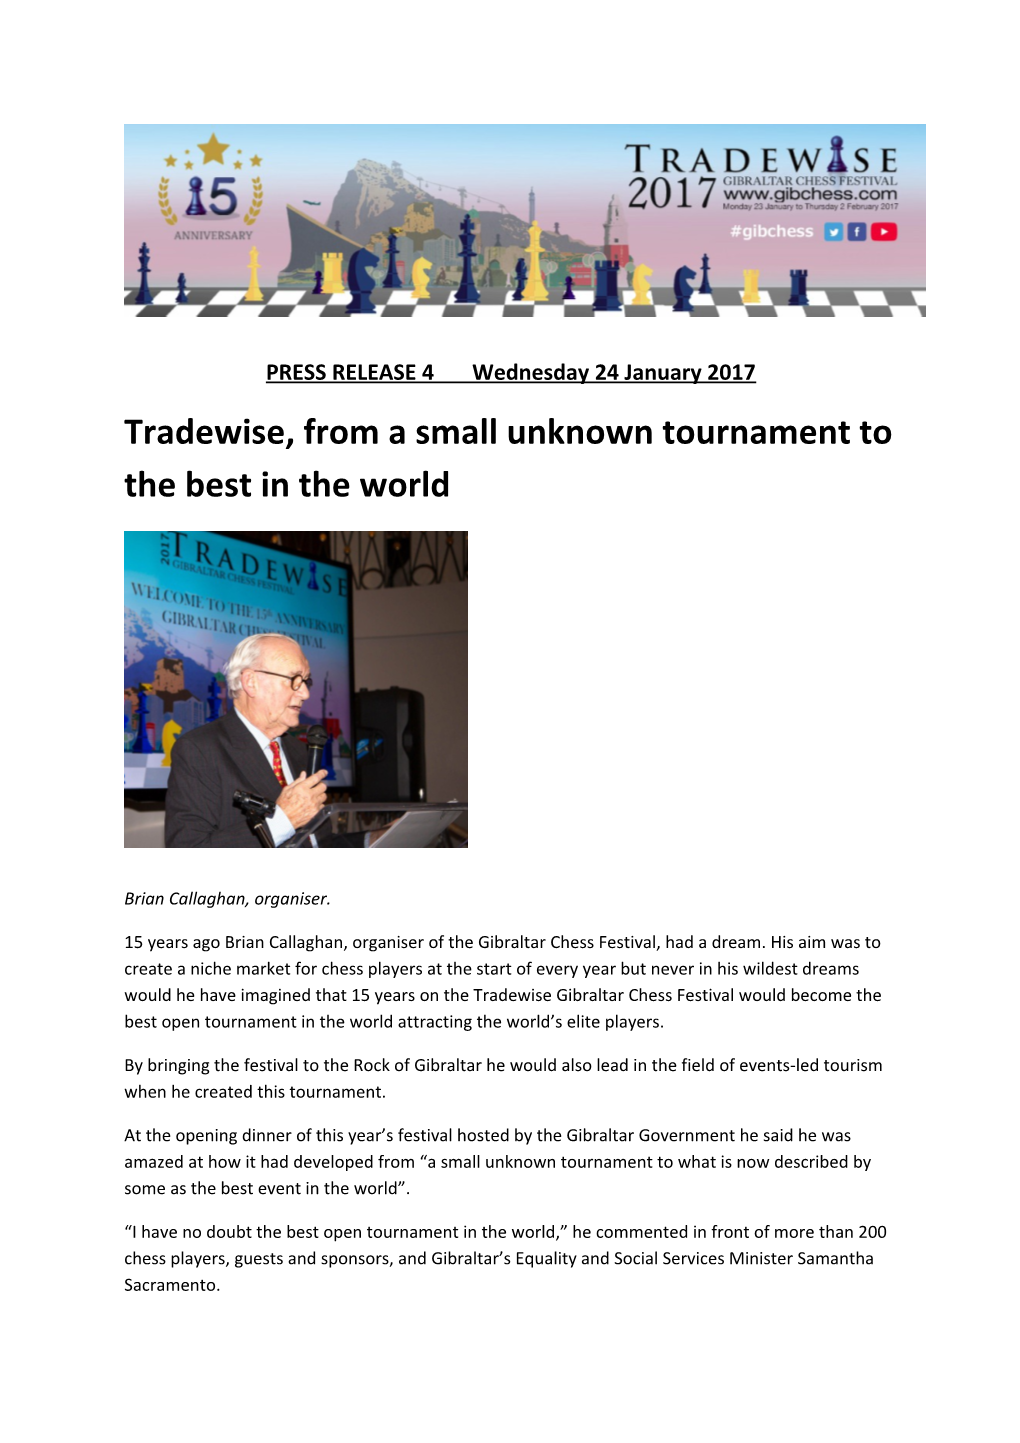 Tradewise, from a Small Unknown Tournament to the Best in the World